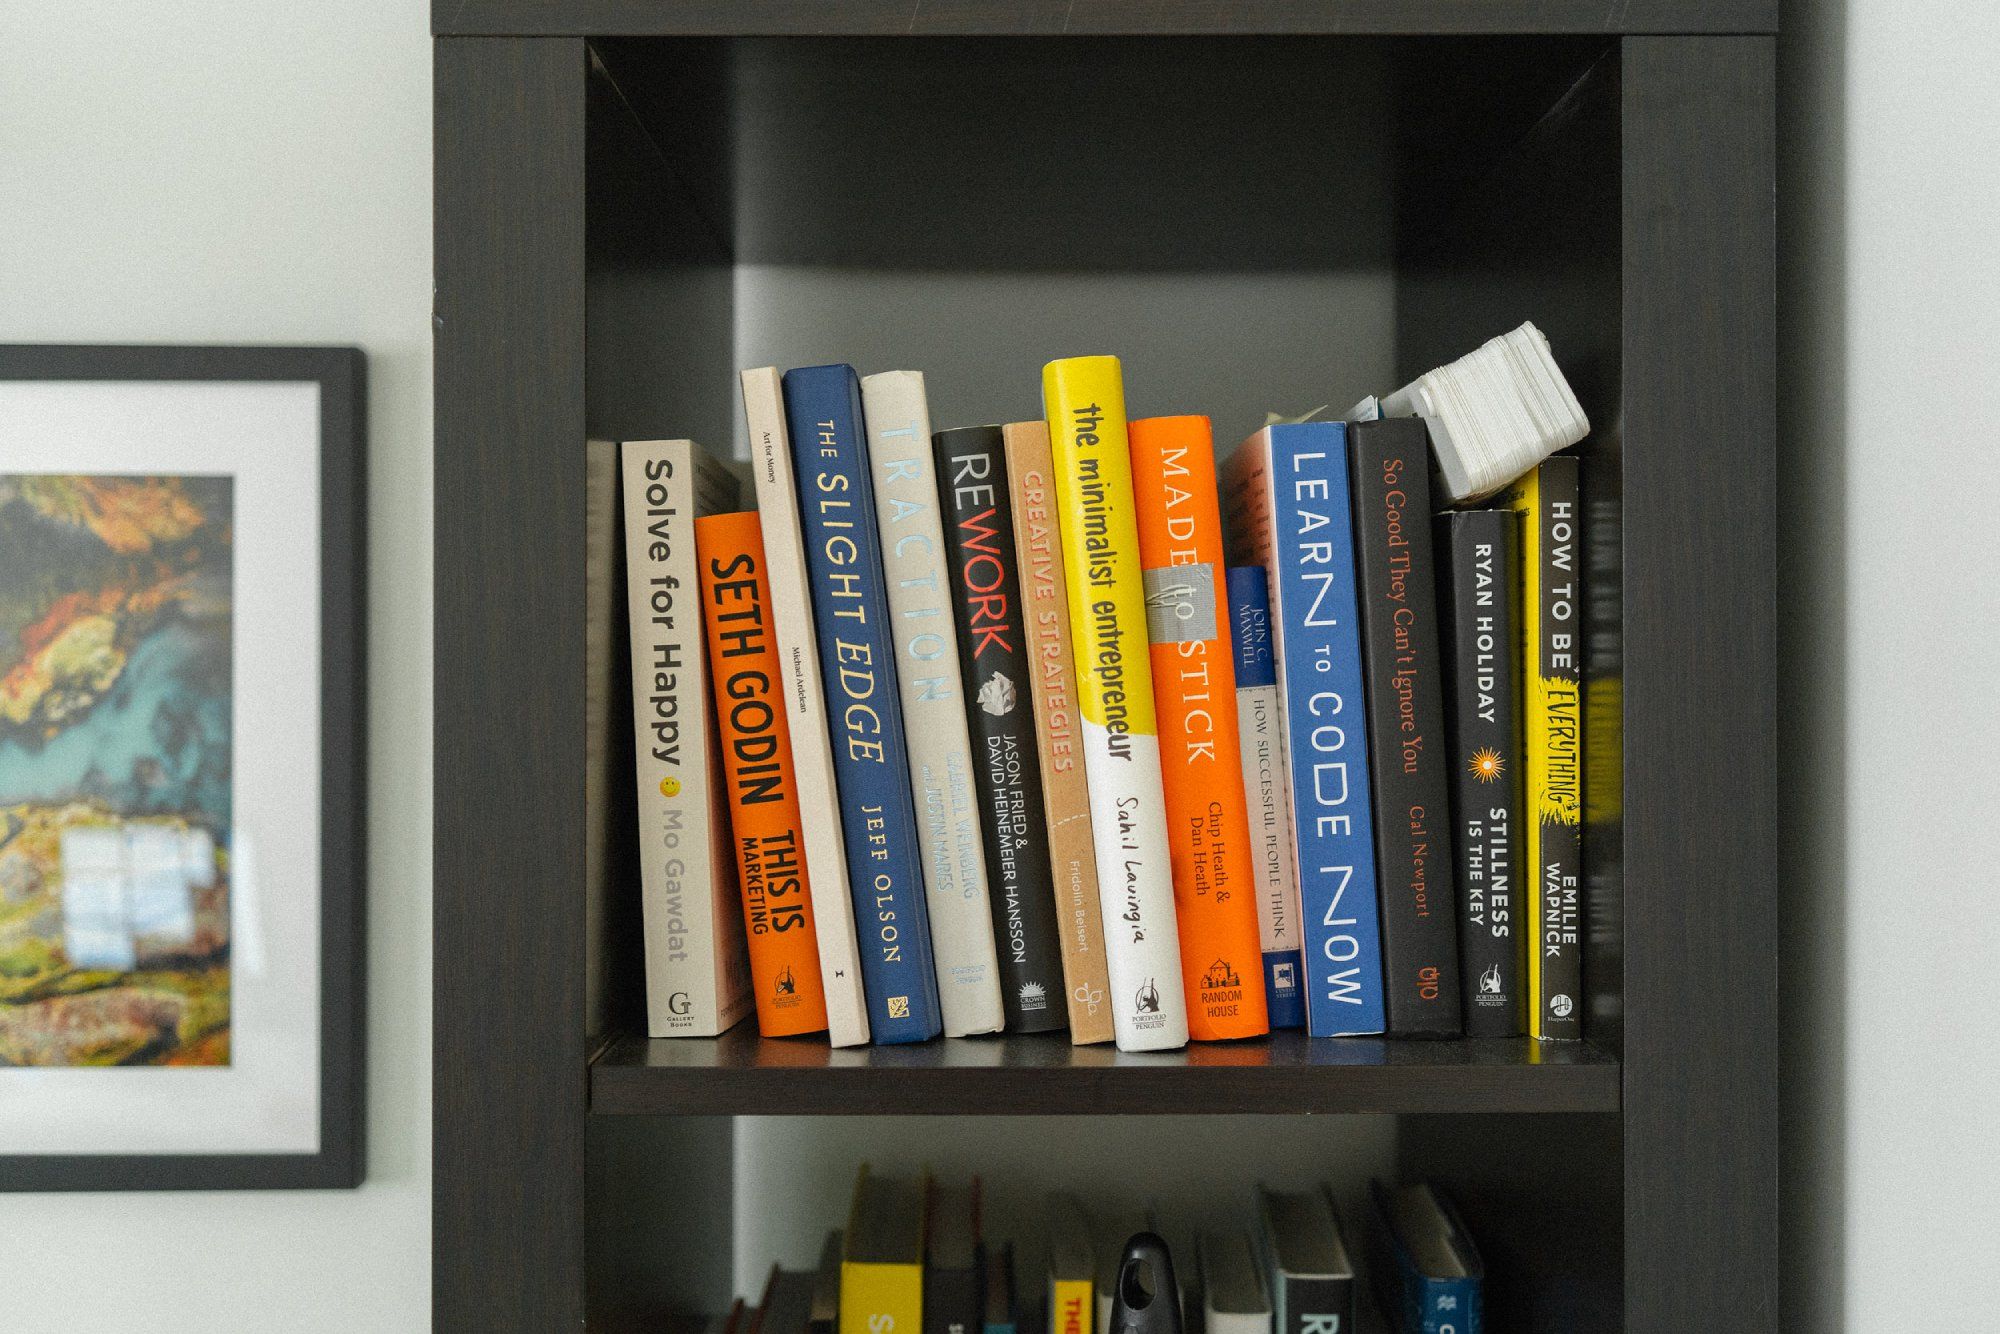 A bookshelf with books on marketing, coding, and design